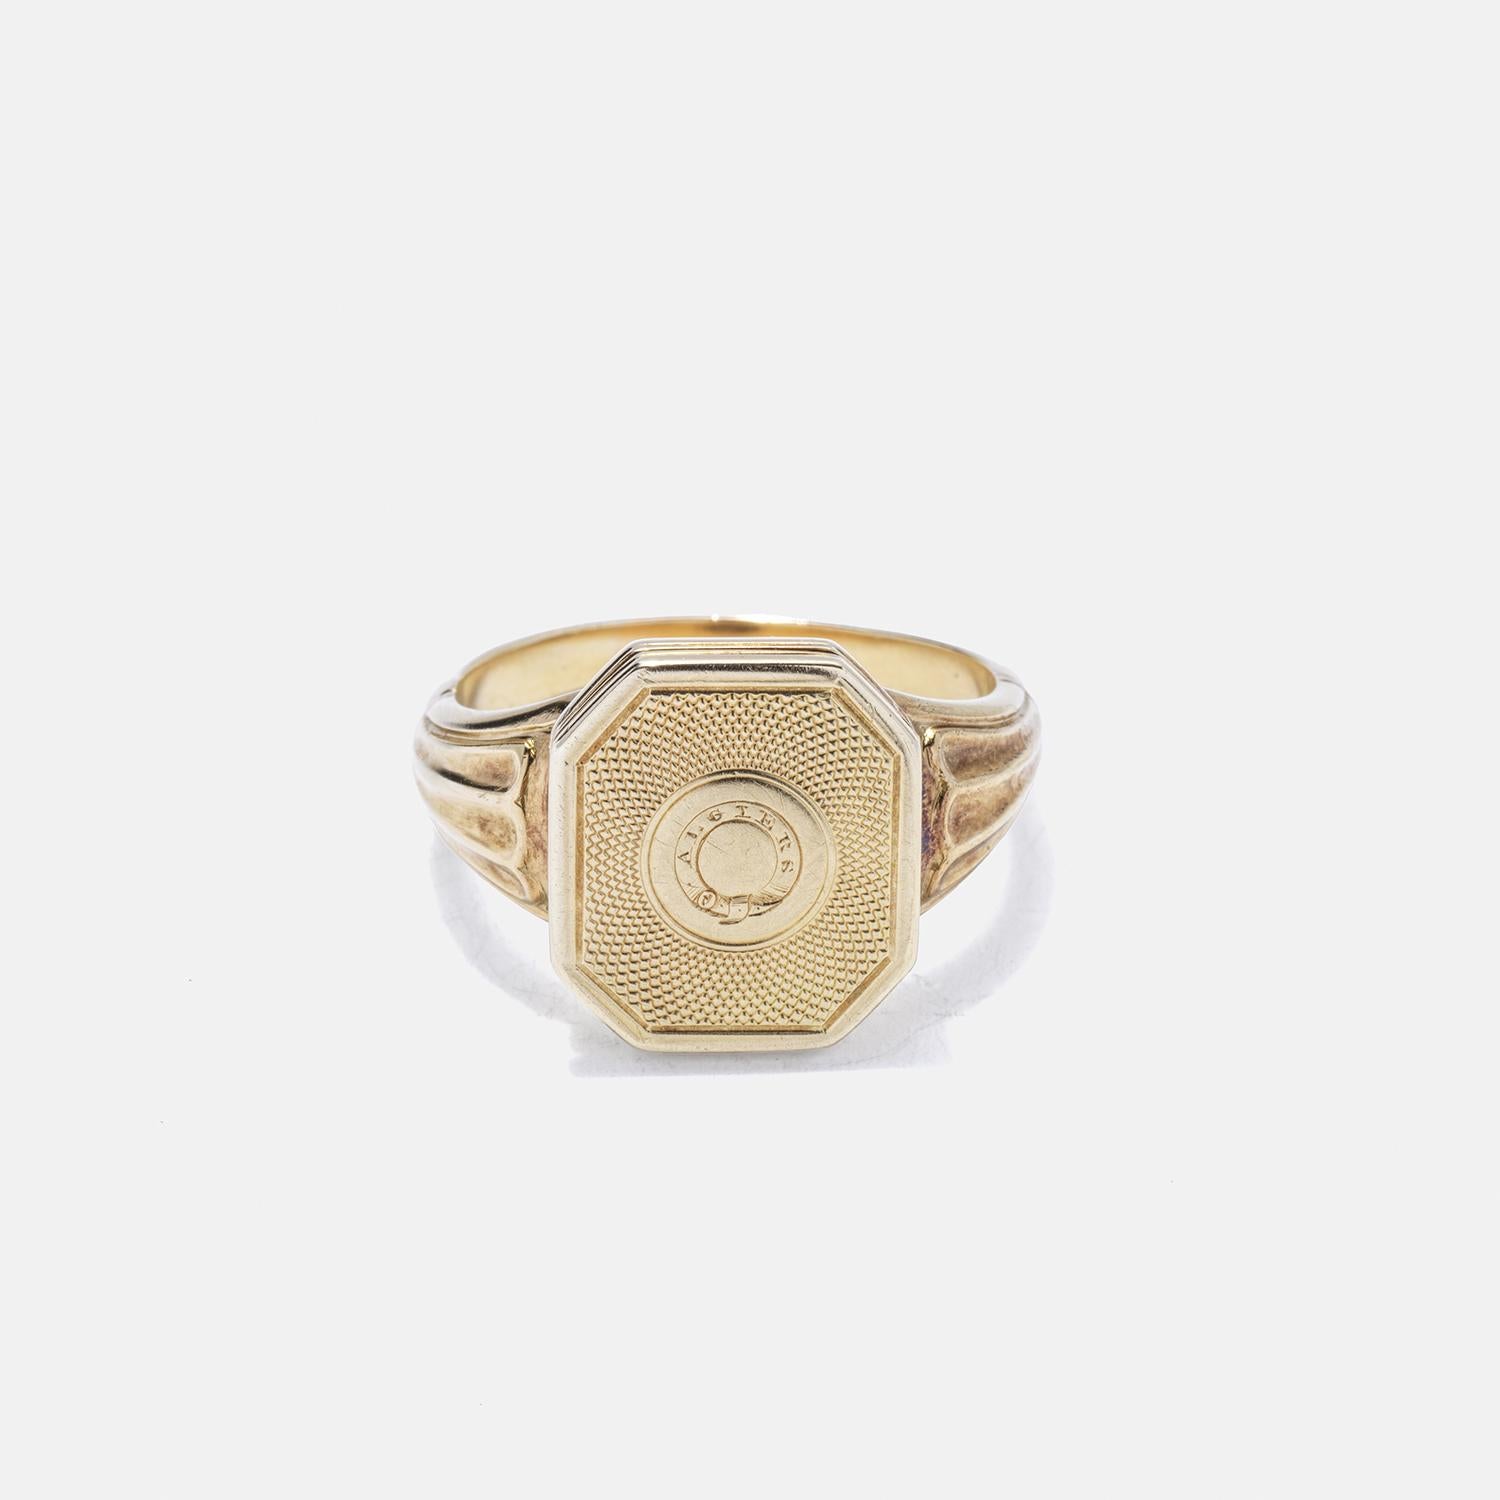 This signet ring is made of 18 karat gold and has a special feature: its seal can be opened to reveal a hidden compartment with an image of Viscount Exmouth inside. On the seal of the ring, the word 